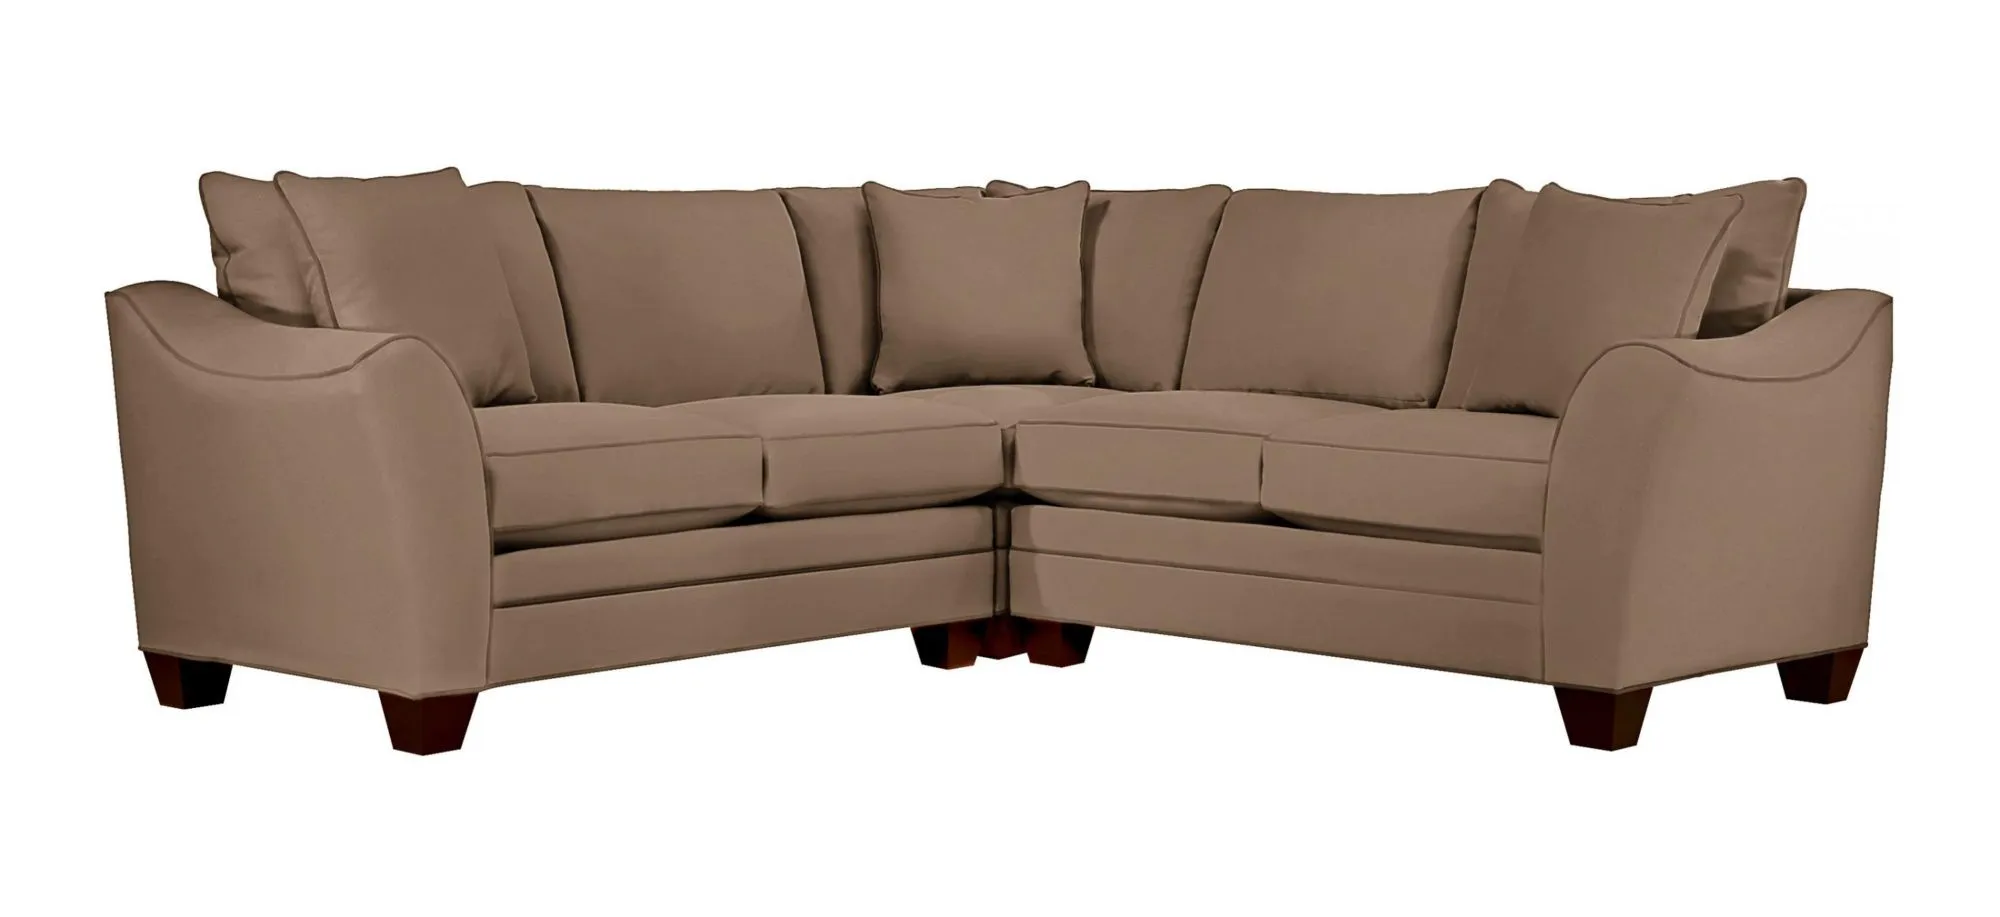 Foresthill 3-pc. Symmetrical Loveseat Sectional Sofa in Suede So Soft Khaki by H.M. Richards